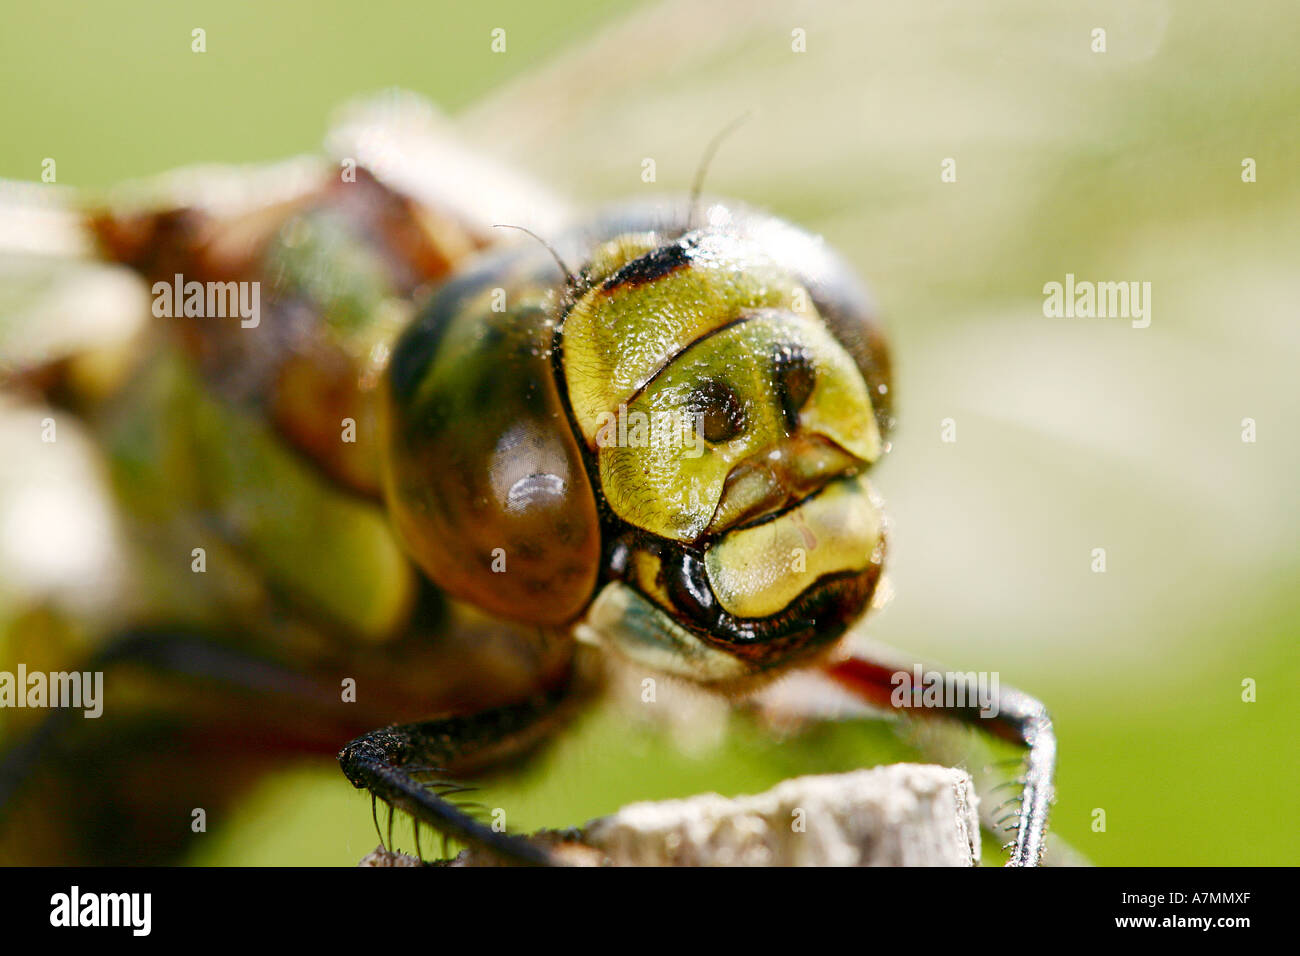 Dragonfly in the wild. Stock Photo